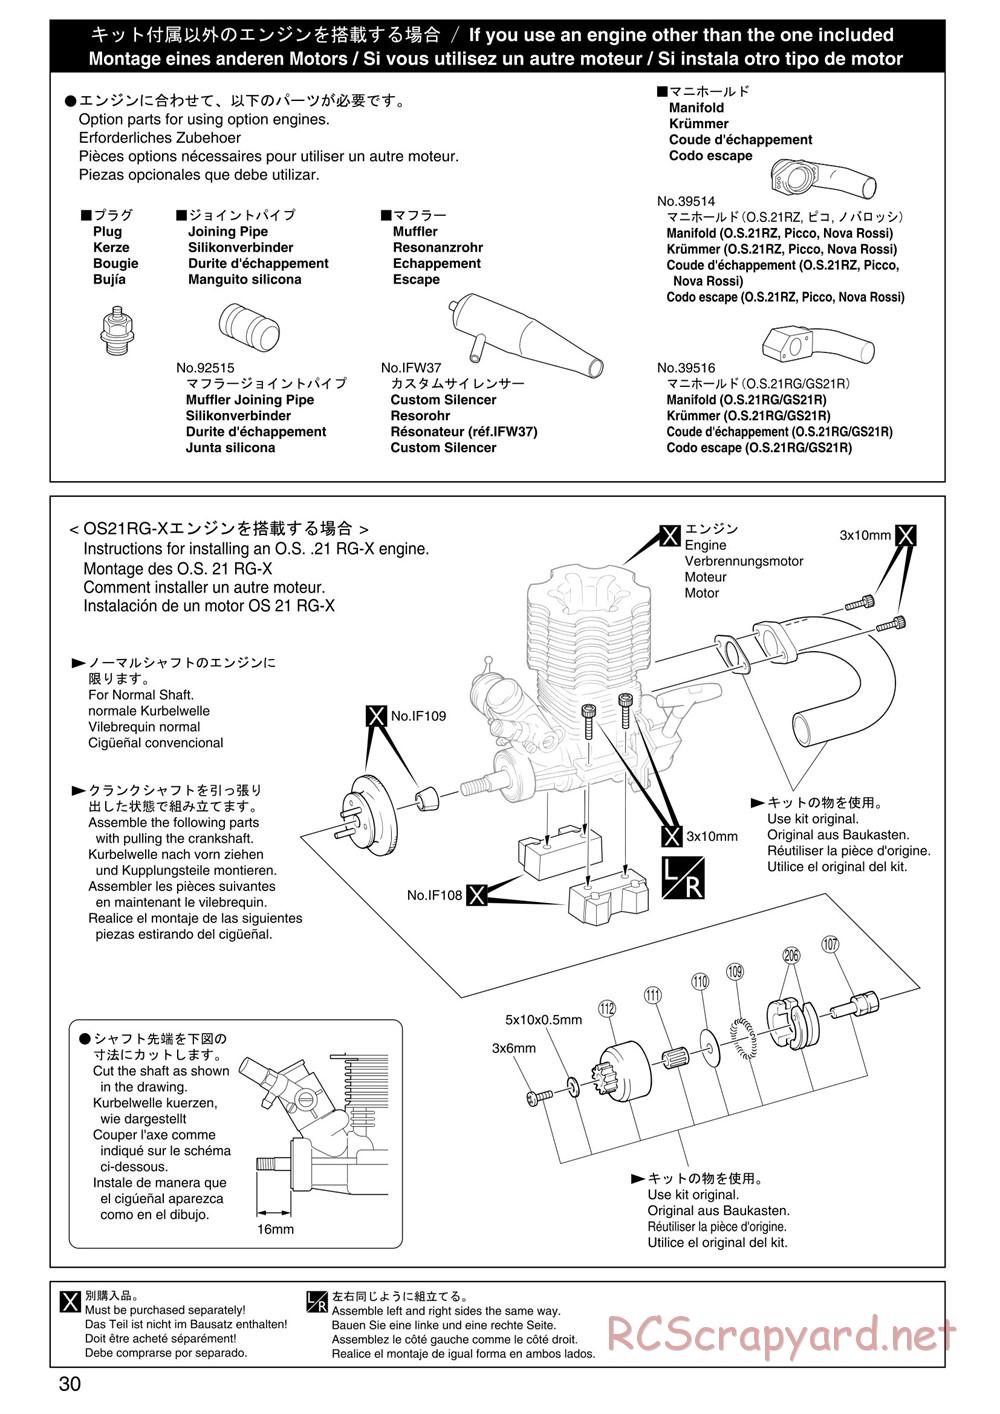 Kyosho - Inferno ST (2005) - Manual - Page 30